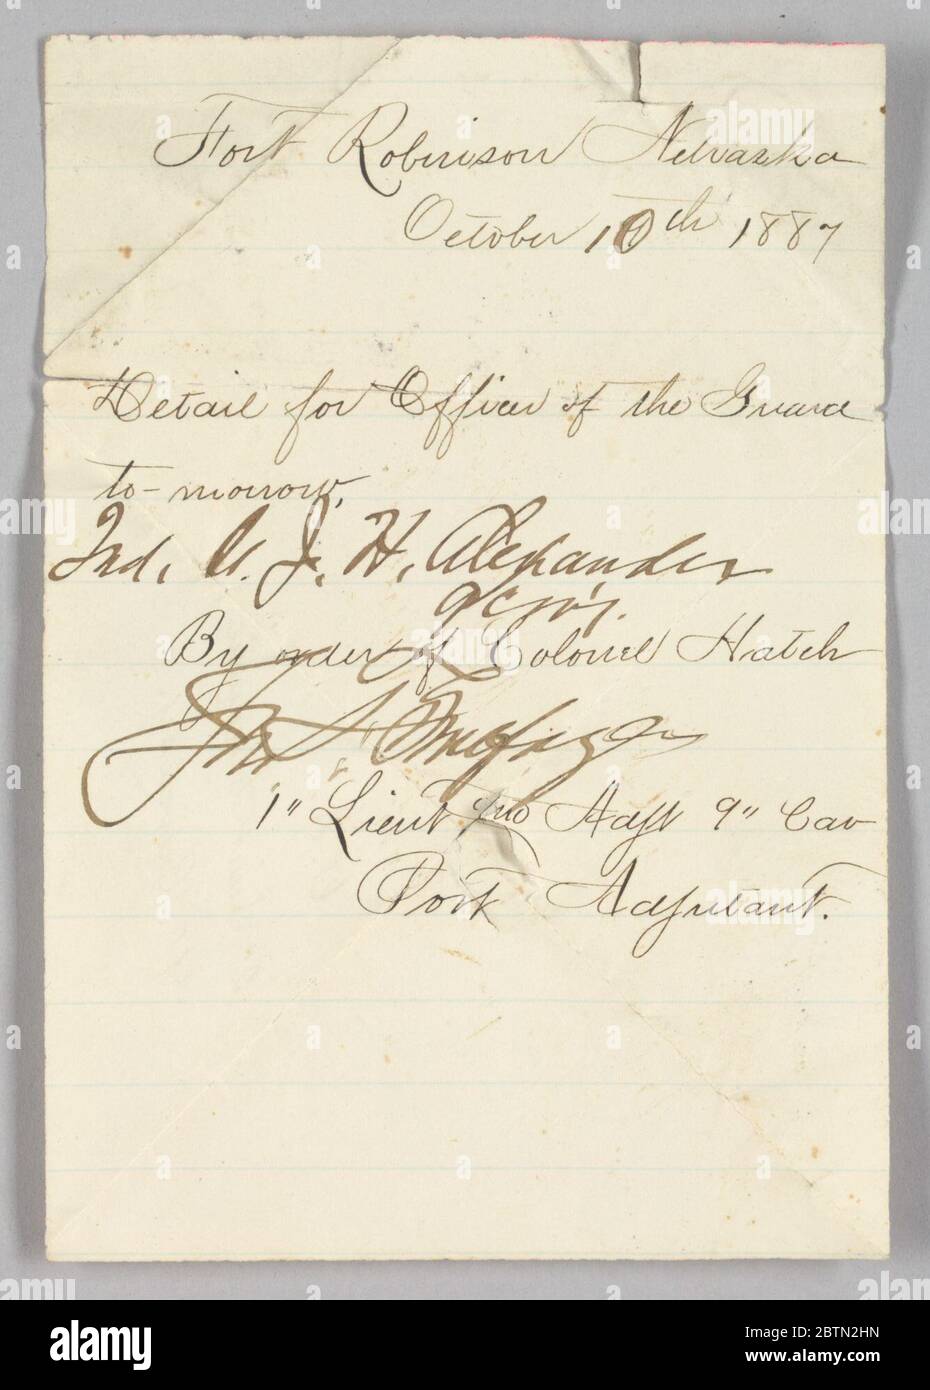 Officer of the Guard order issued to John H Alexander. Hand-written order issued to second lieutenant John Hanks Alexander to report for Officers of the Guard duty at Fort Robinson, Nebraska on October 10, 1887. The document was written by an unidentified first lieutenant by order of Colonel Edward Hatch. Stock Photo